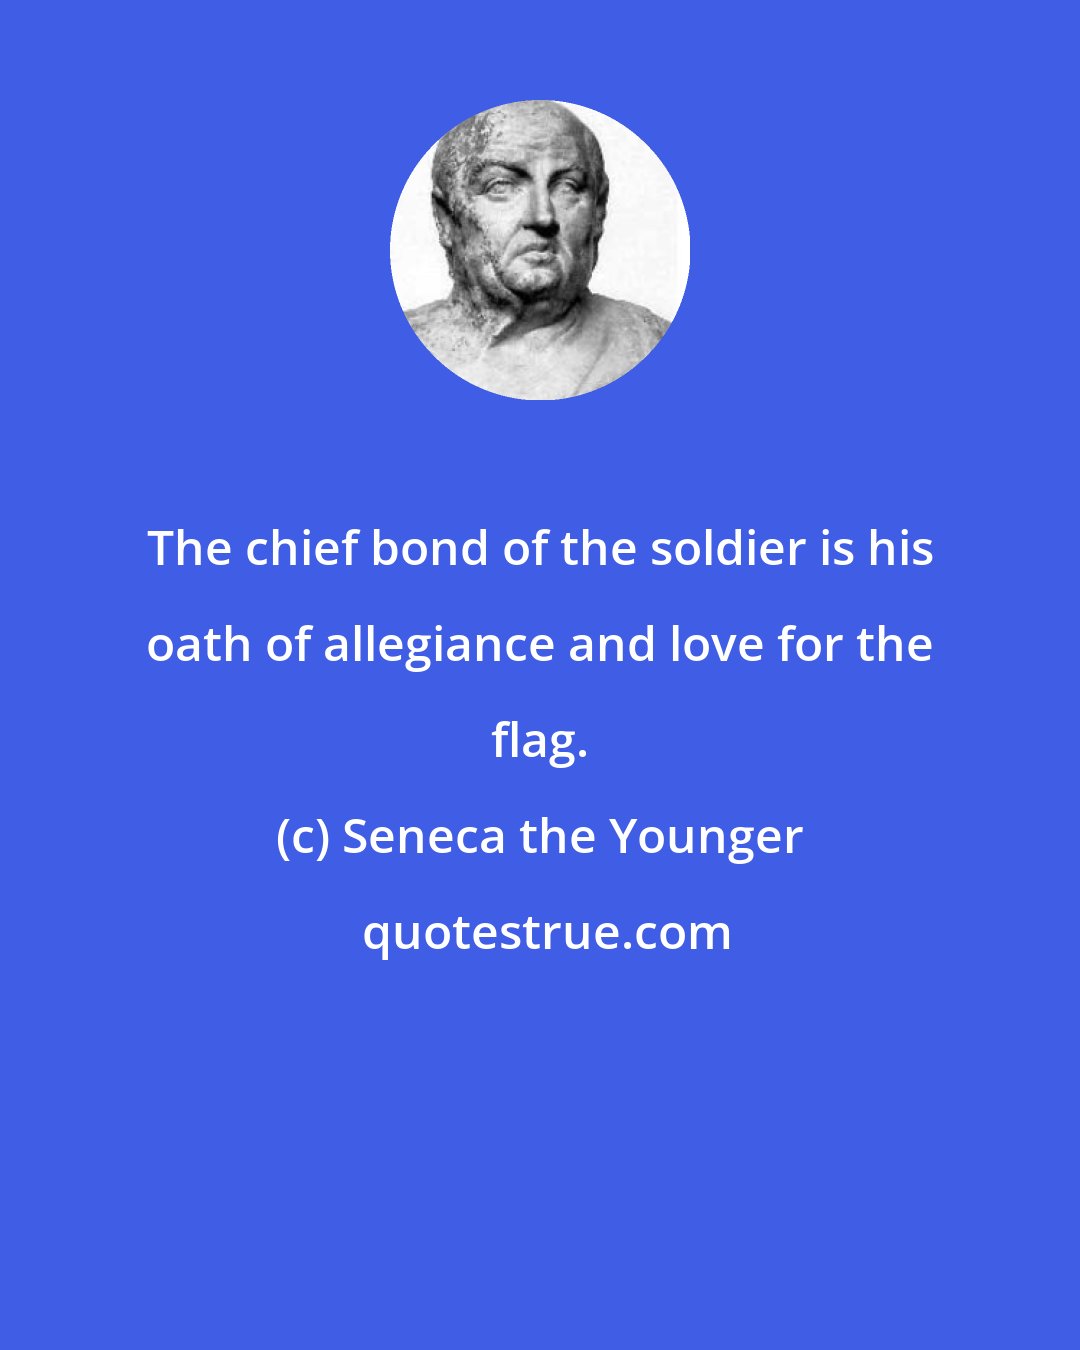 Seneca the Younger: The chief bond of the soldier is his oath of allegiance and love for the flag.